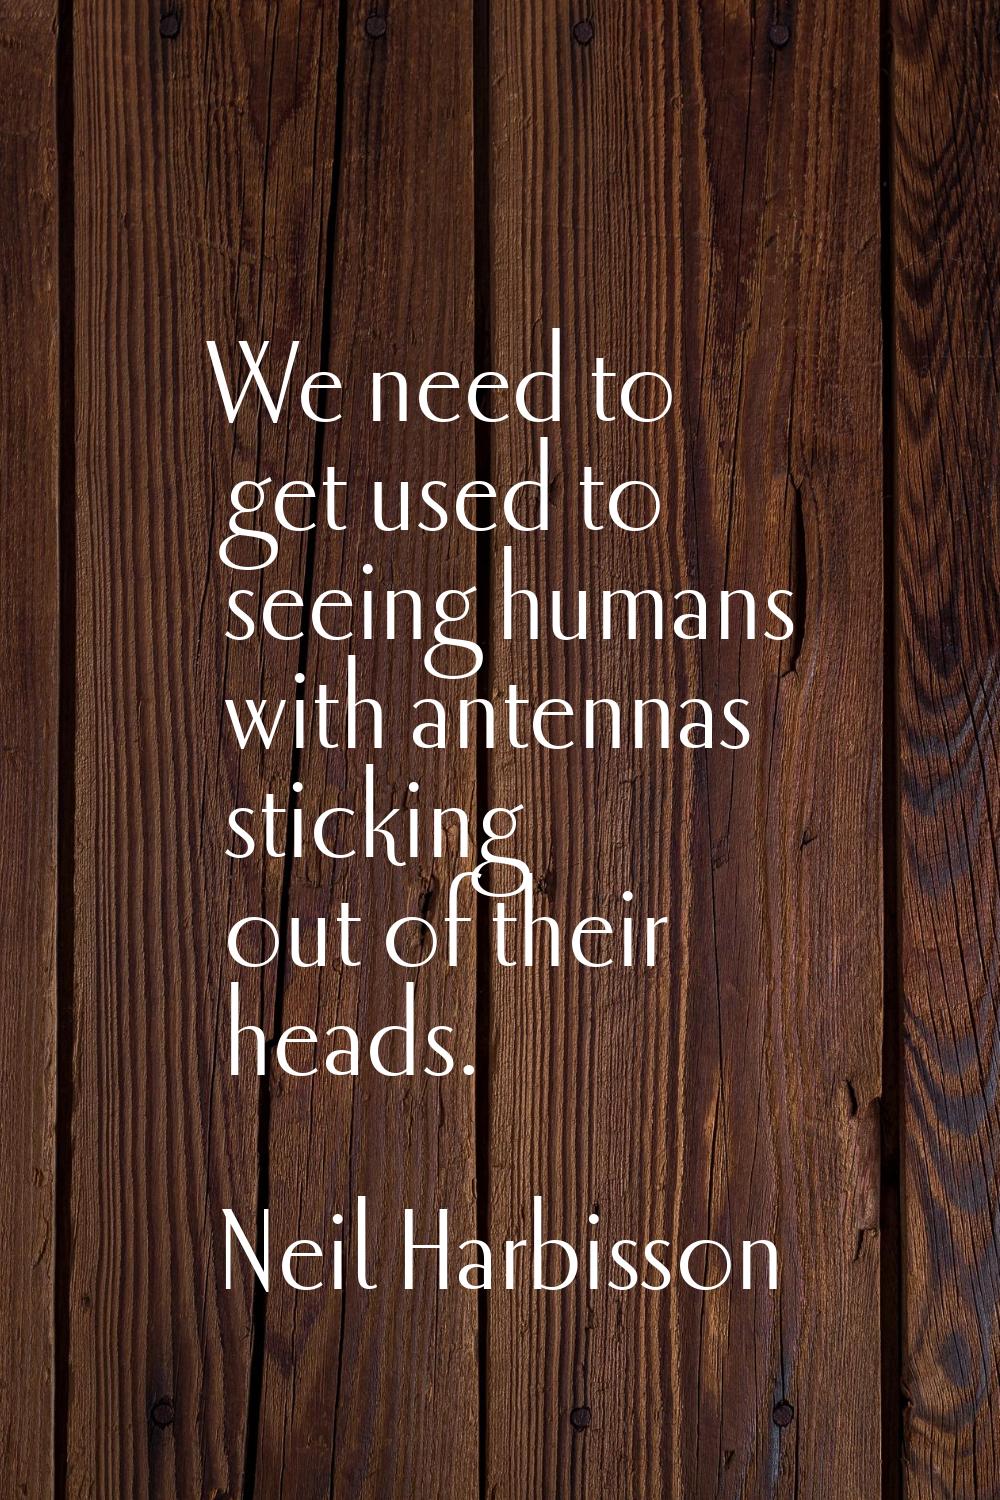 We need to get used to seeing humans with antennas sticking out of their heads.